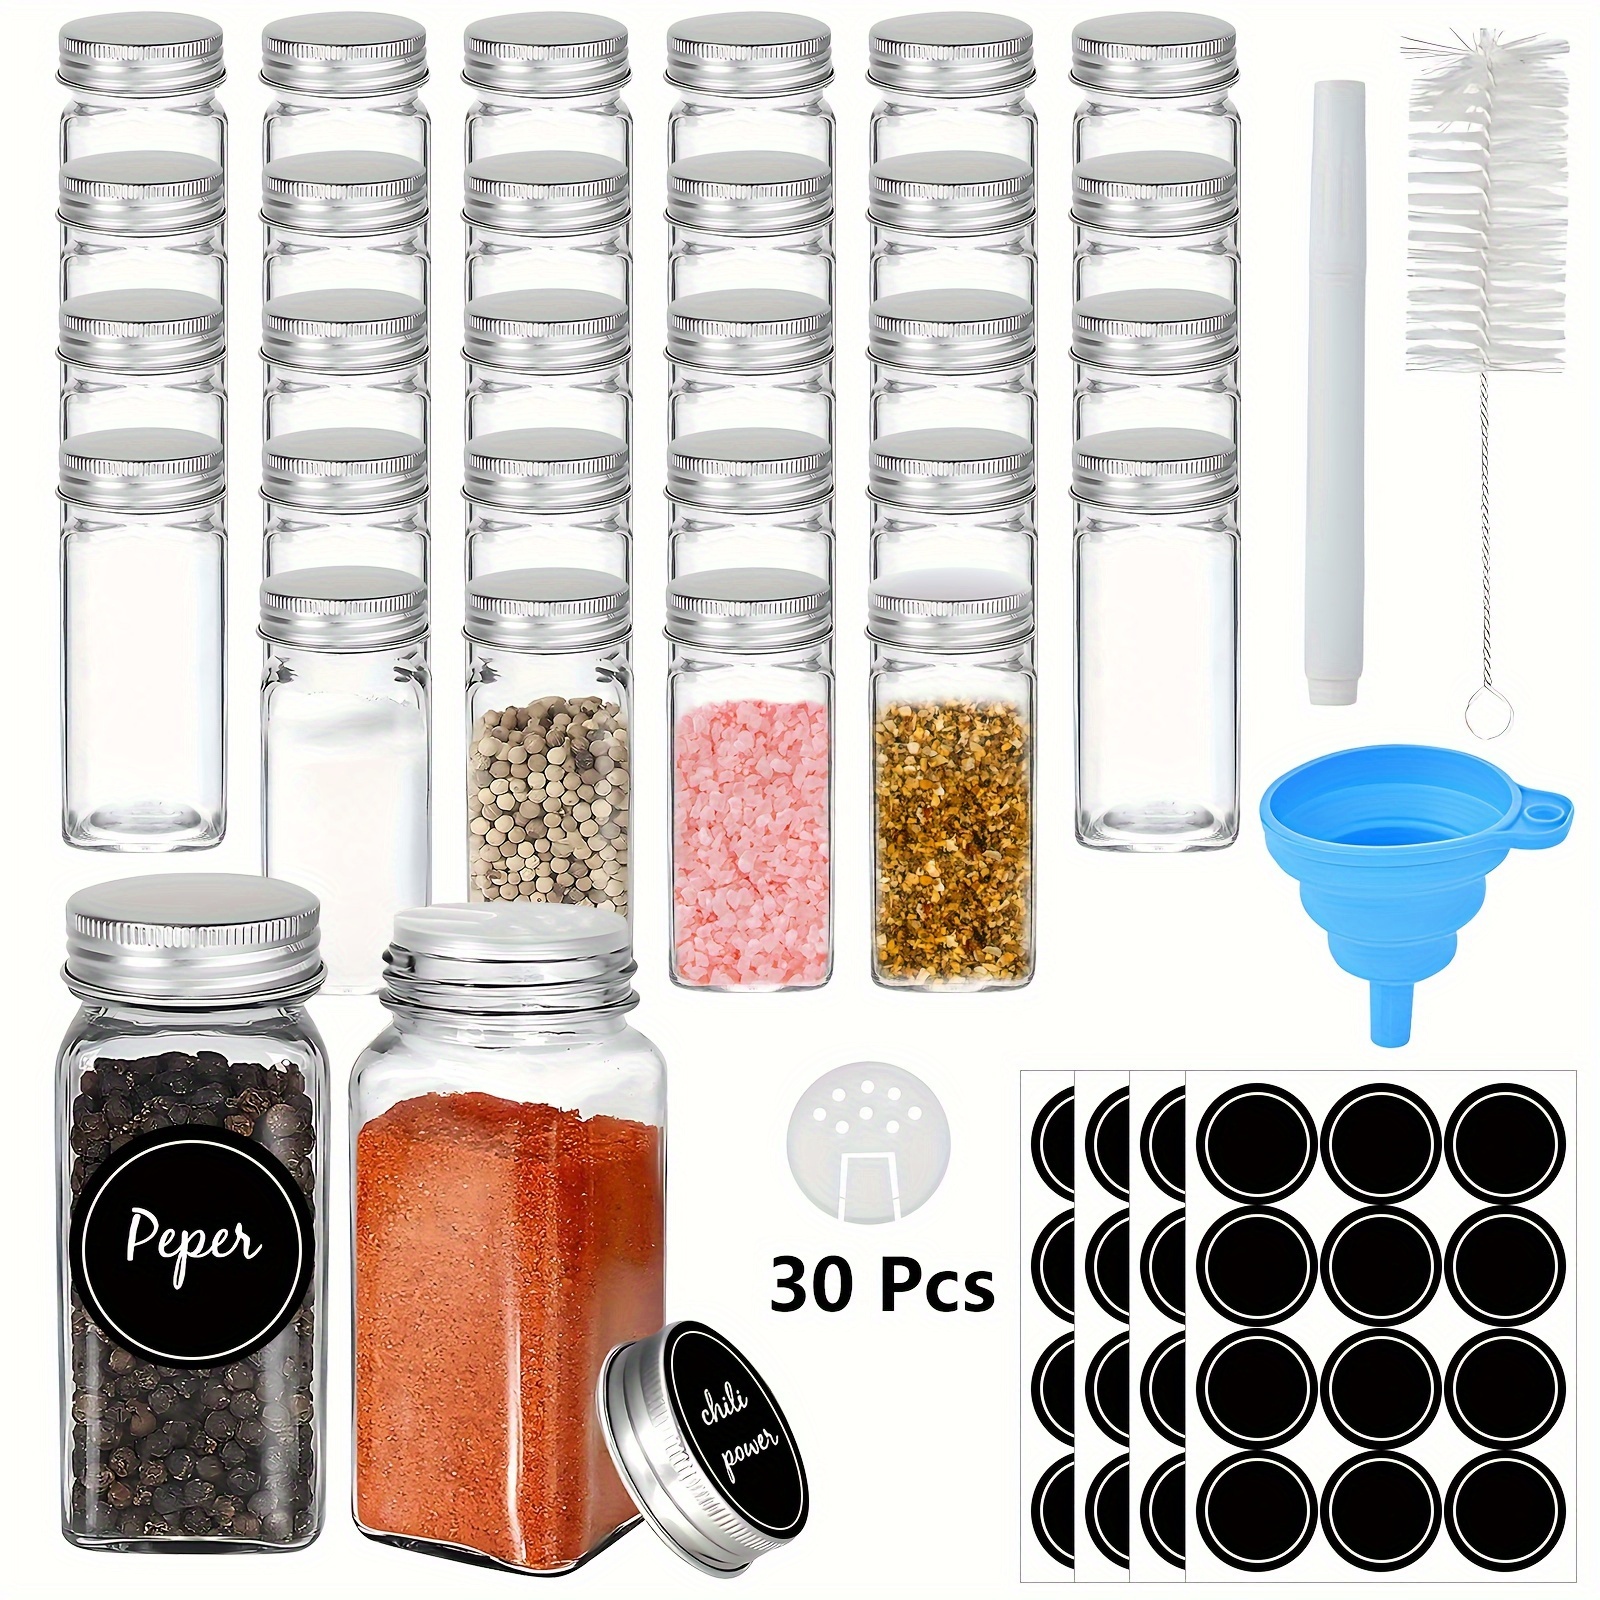 15 Pack 4oz Glass Spice Jars Bottles, Square Spice Containers with Silver  Metal Caps and Pour/